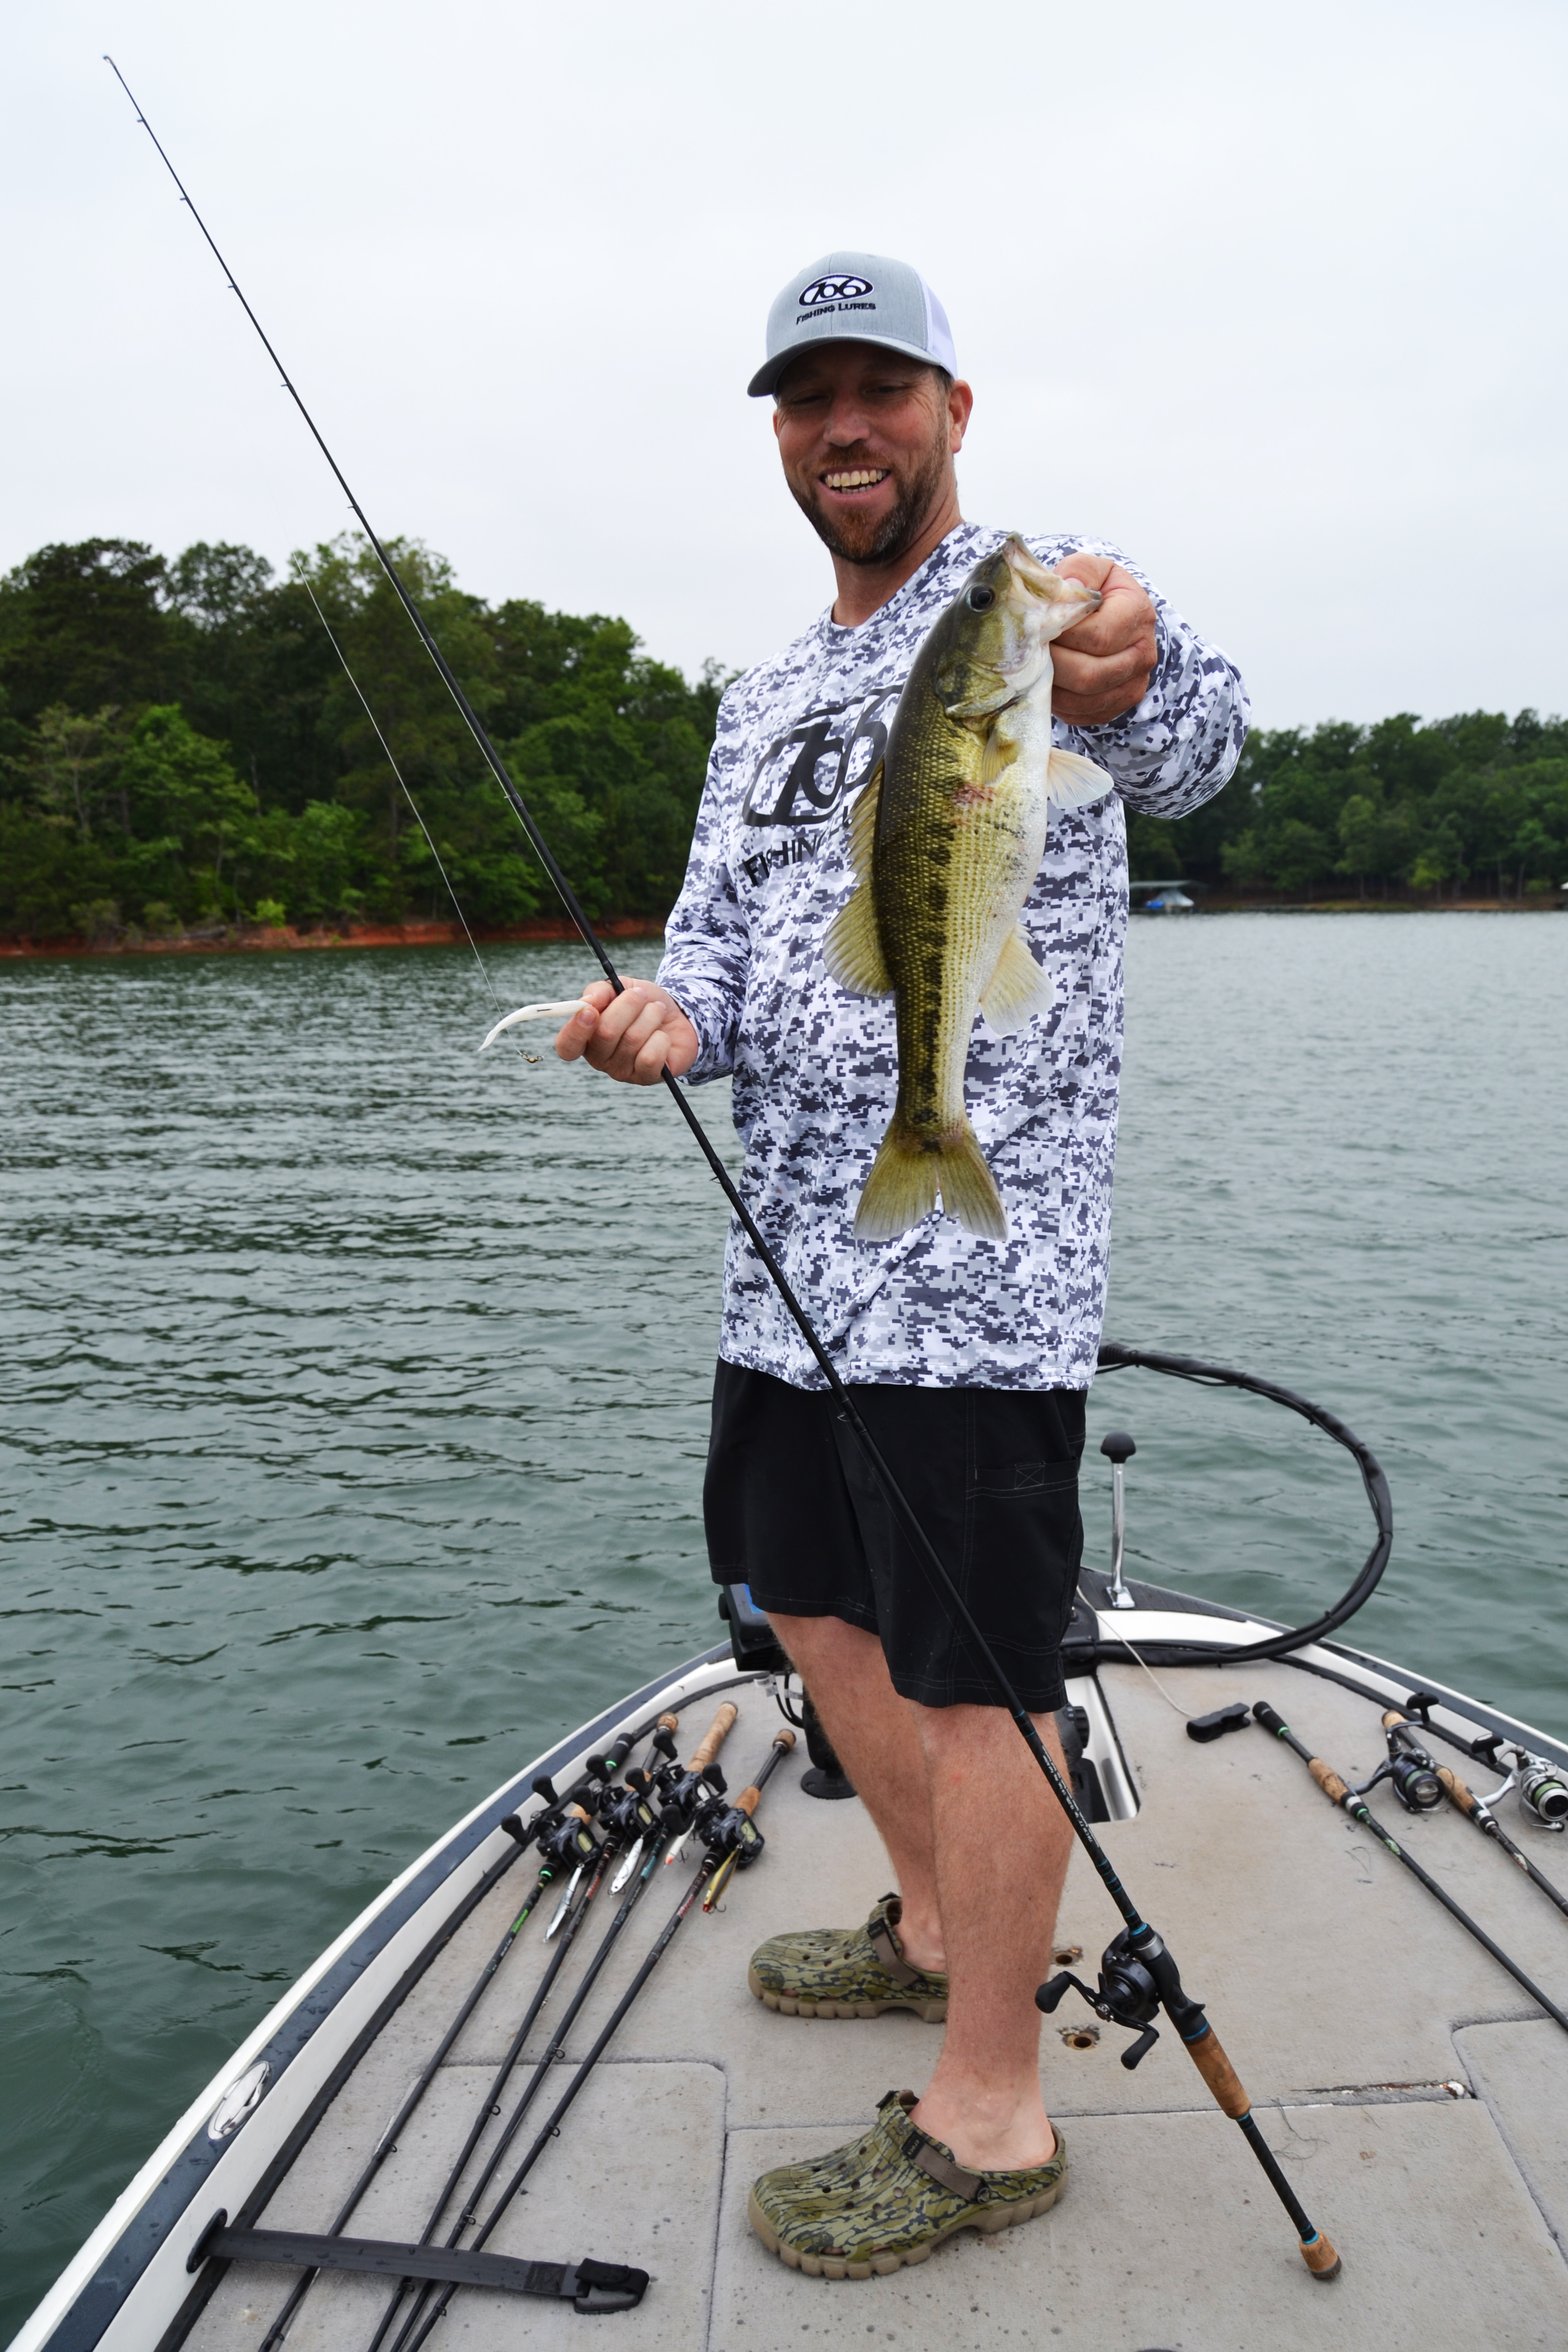 Fishing guide Josh Fowler shows a large mouth bass caught on Lake Hartwell. (Photo/Michael Isom)